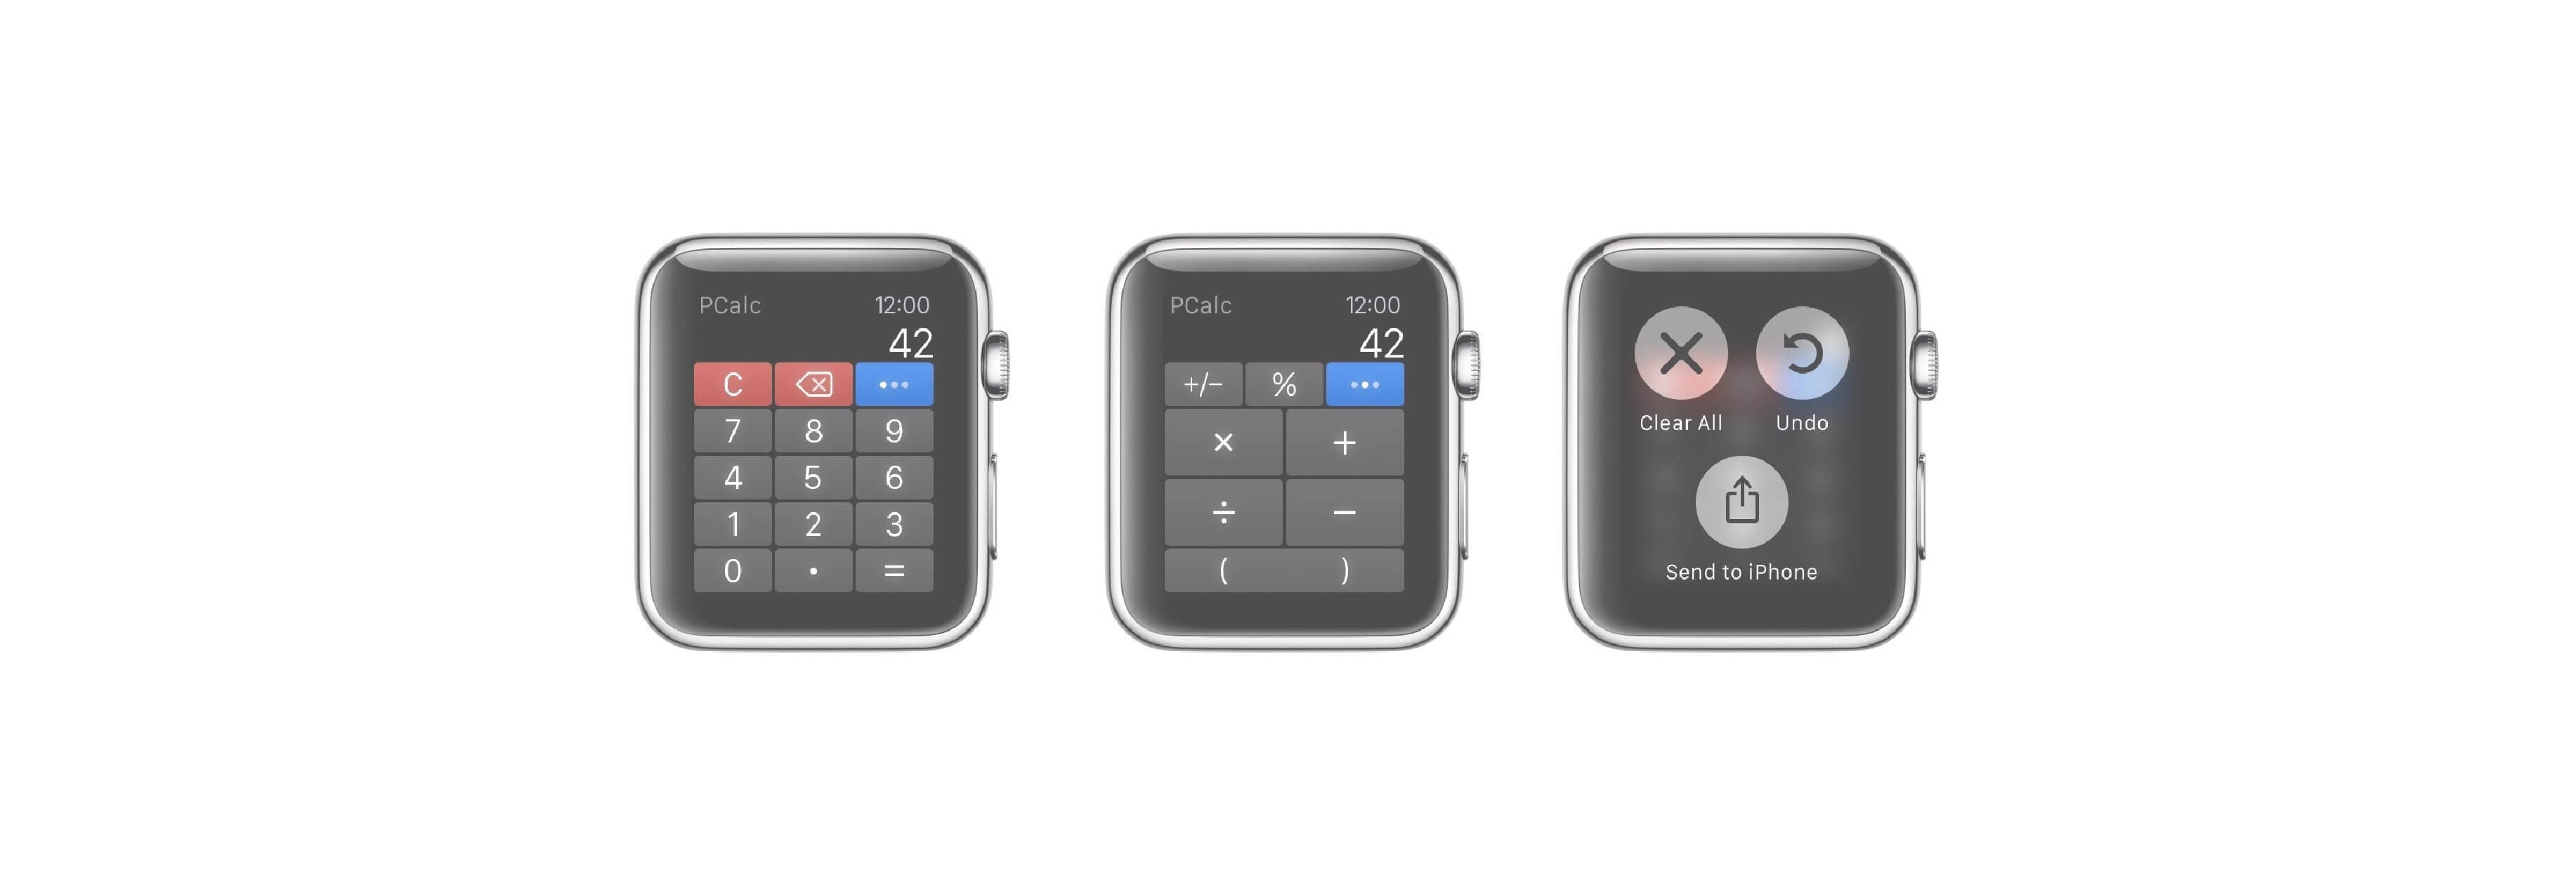 How to use the Calculator on Apple Watch